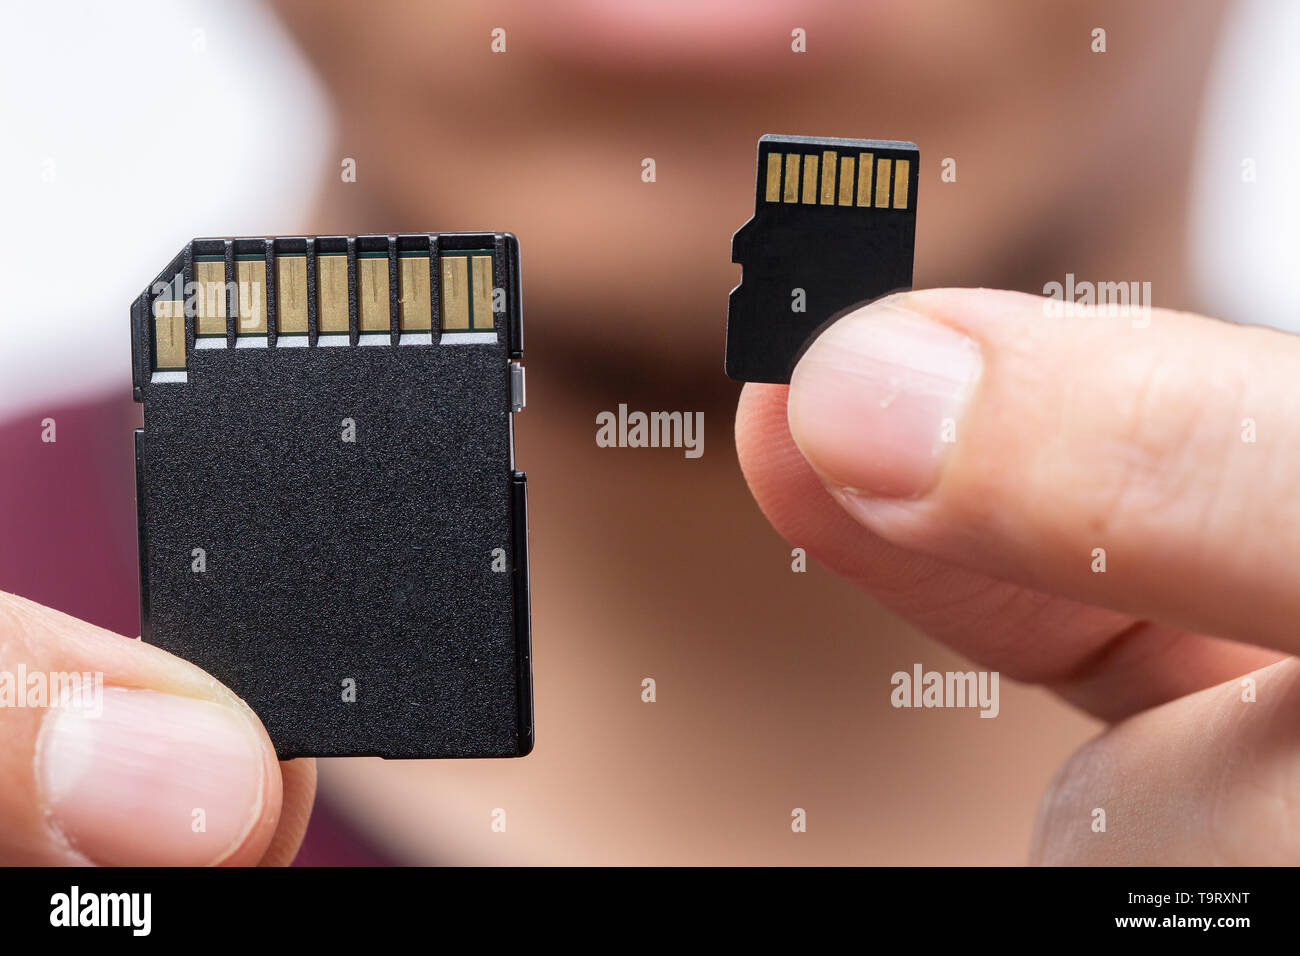 Digital Storage memory size matter concept,SD Card and Micro SD Card compare on handle Stock Photo